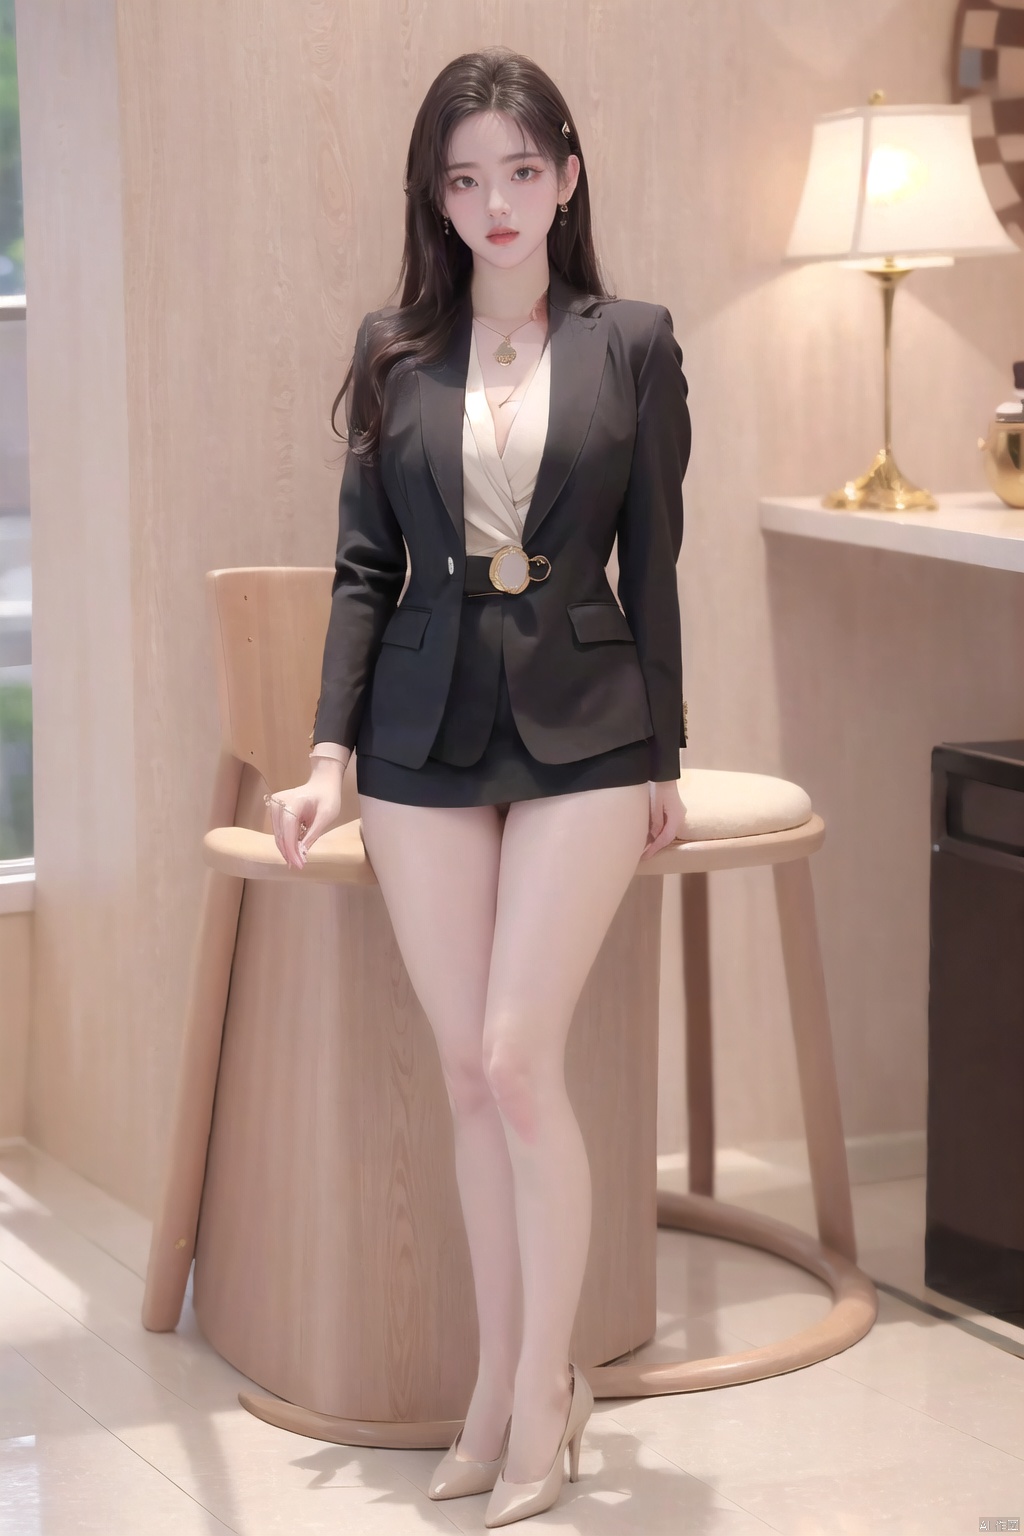  (upper body:1.3), liuyifei,flowers,masterpiece, best quality, ultra-detailed, ultra high res,8k, (photorealistic:1.2), RAW photo, extremely detailed, 1 girl, (18_years_old),(172cm tall), (((elegant))), (round face:1.3), (long hair), black hair, curly hair, seductive smile, beautiful detailed eyes, beautiful detailed face,(white shirt),suit jacketlexious,necklace,diamond ring,bracelets,earrings, huge breasts:3.0, slender waist, long legs,thick legs,plump,strong abs,(high heels:1.3),(pantyhose:1.3),(in the office),sitting on a chair,cross legs,lighting on face, bright back lighting, (((cuminpussy))), mimi, yangmi, Cum in mouth, NSFW, Pee, 1girl, Revcow, Doggy style sex front view, Usquat, ***** on glass, Standing split, Ass up wait feet, Missionary pov, Cum bath,moyou, Bukkake, liuyife, yangchaoyue, girl